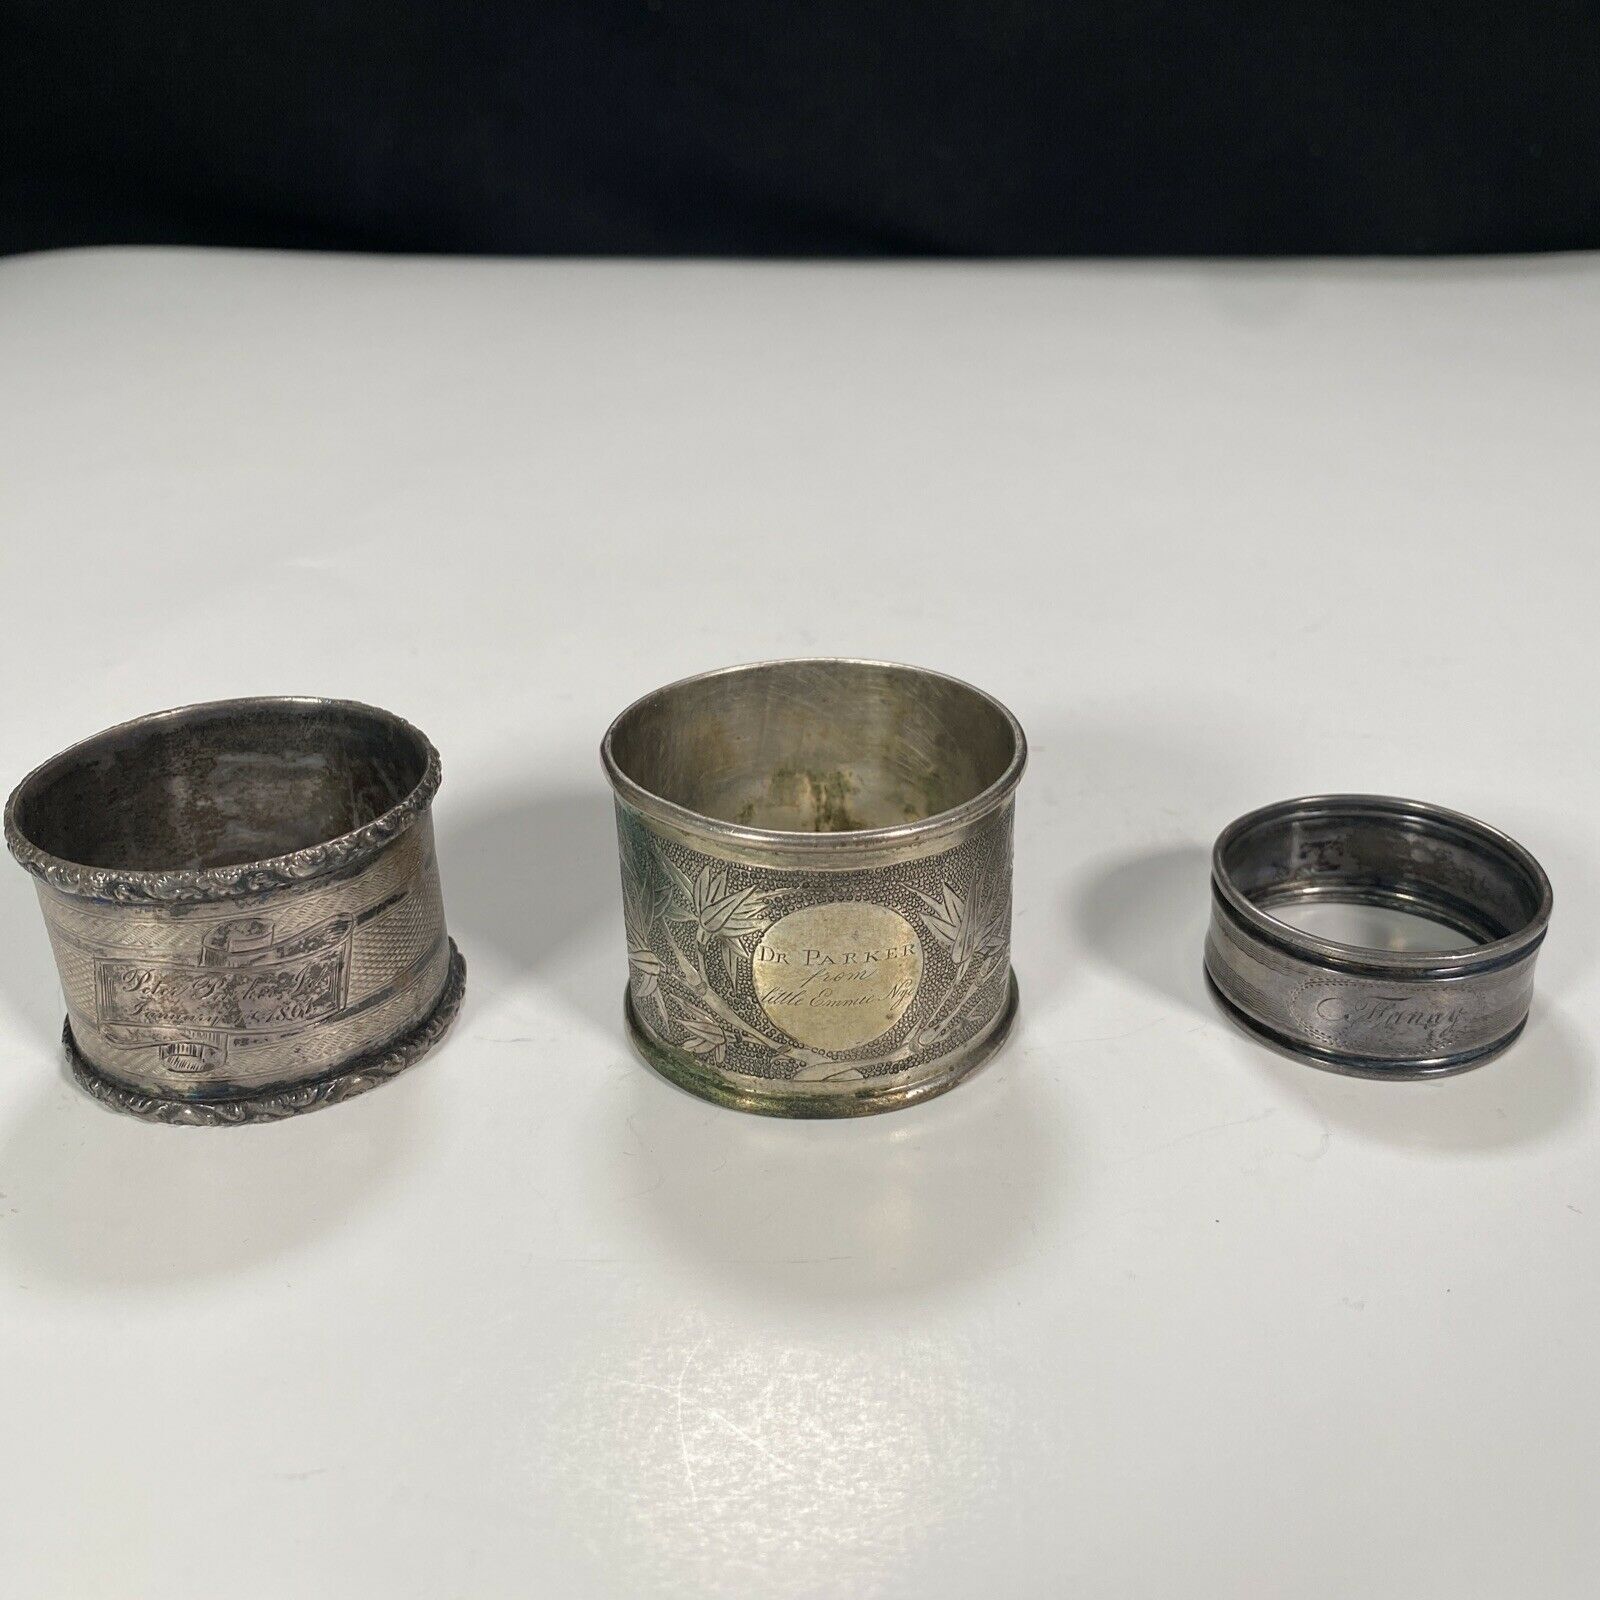 Antique Engraved Silver Napkin Rings, Historic